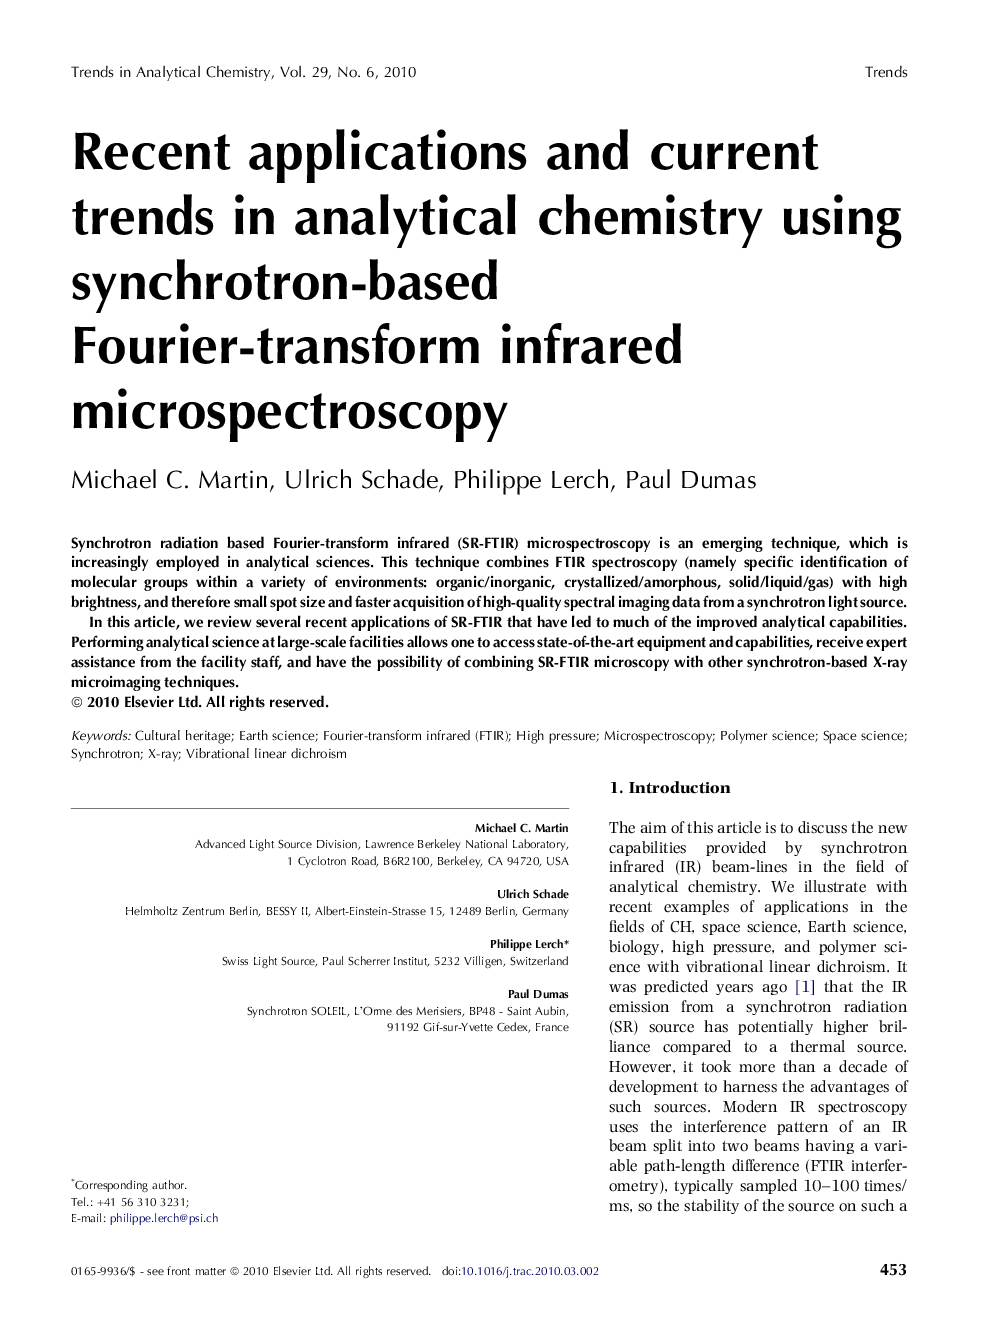 Recent applications and current trends in analytical chemistry using synchrotron-based Fourier-transform infrared microspectroscopy